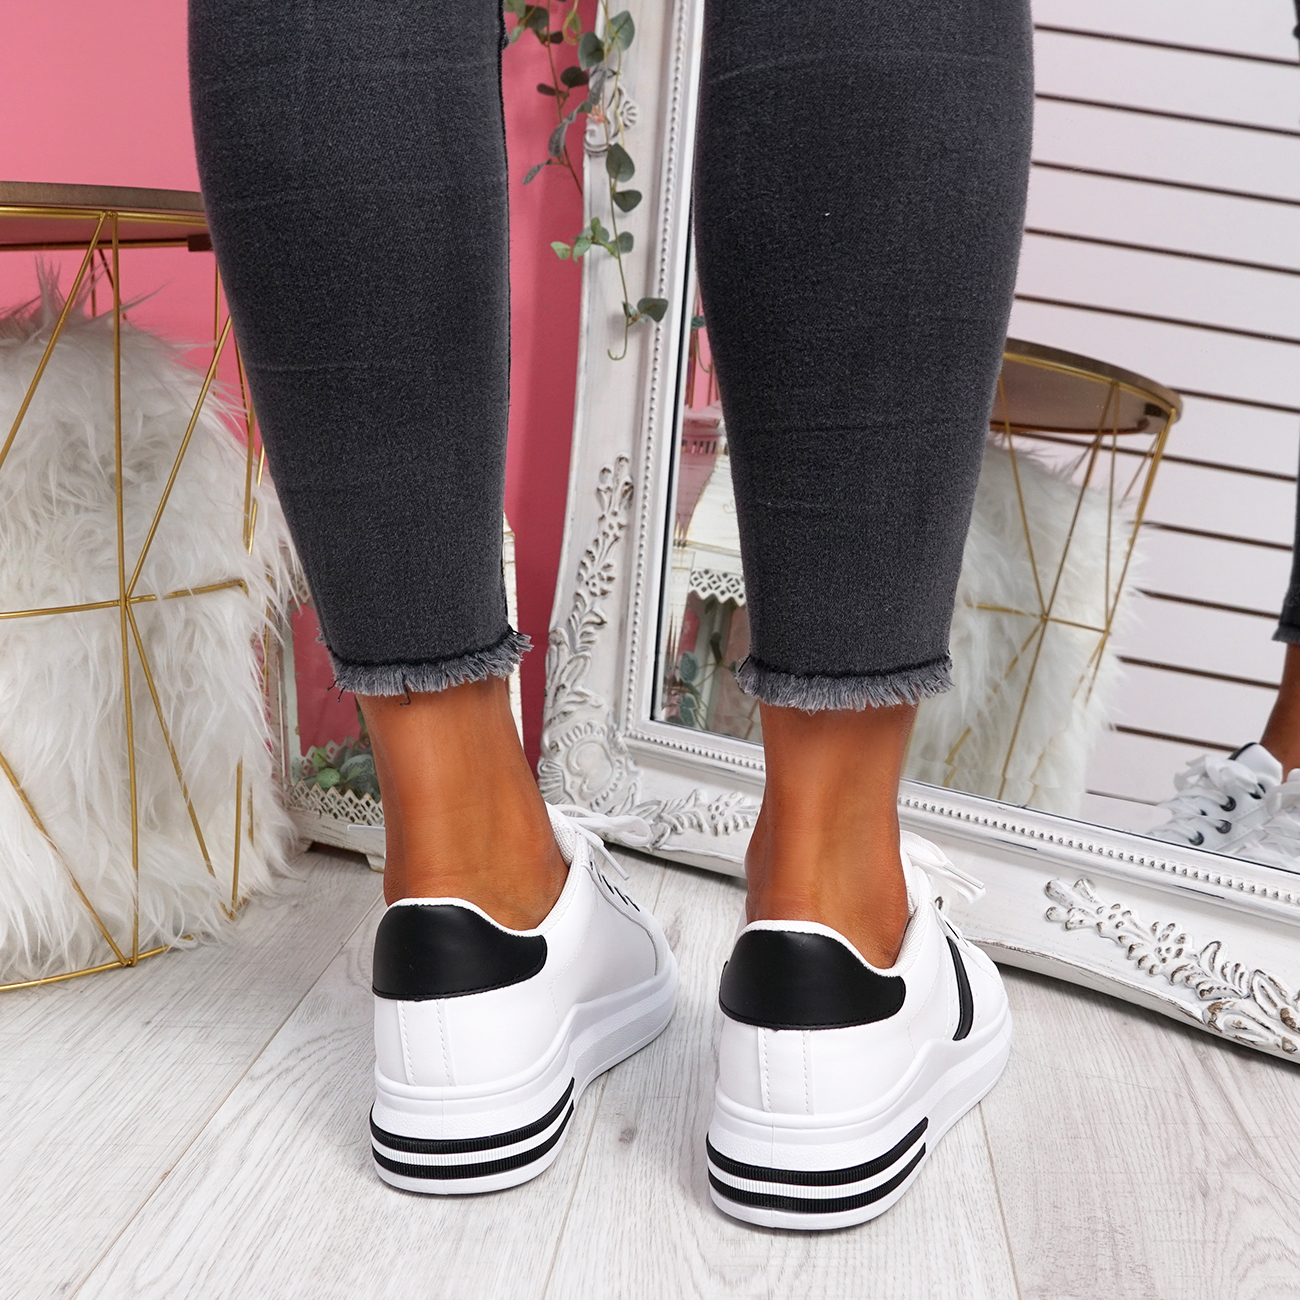 casual trainers womens